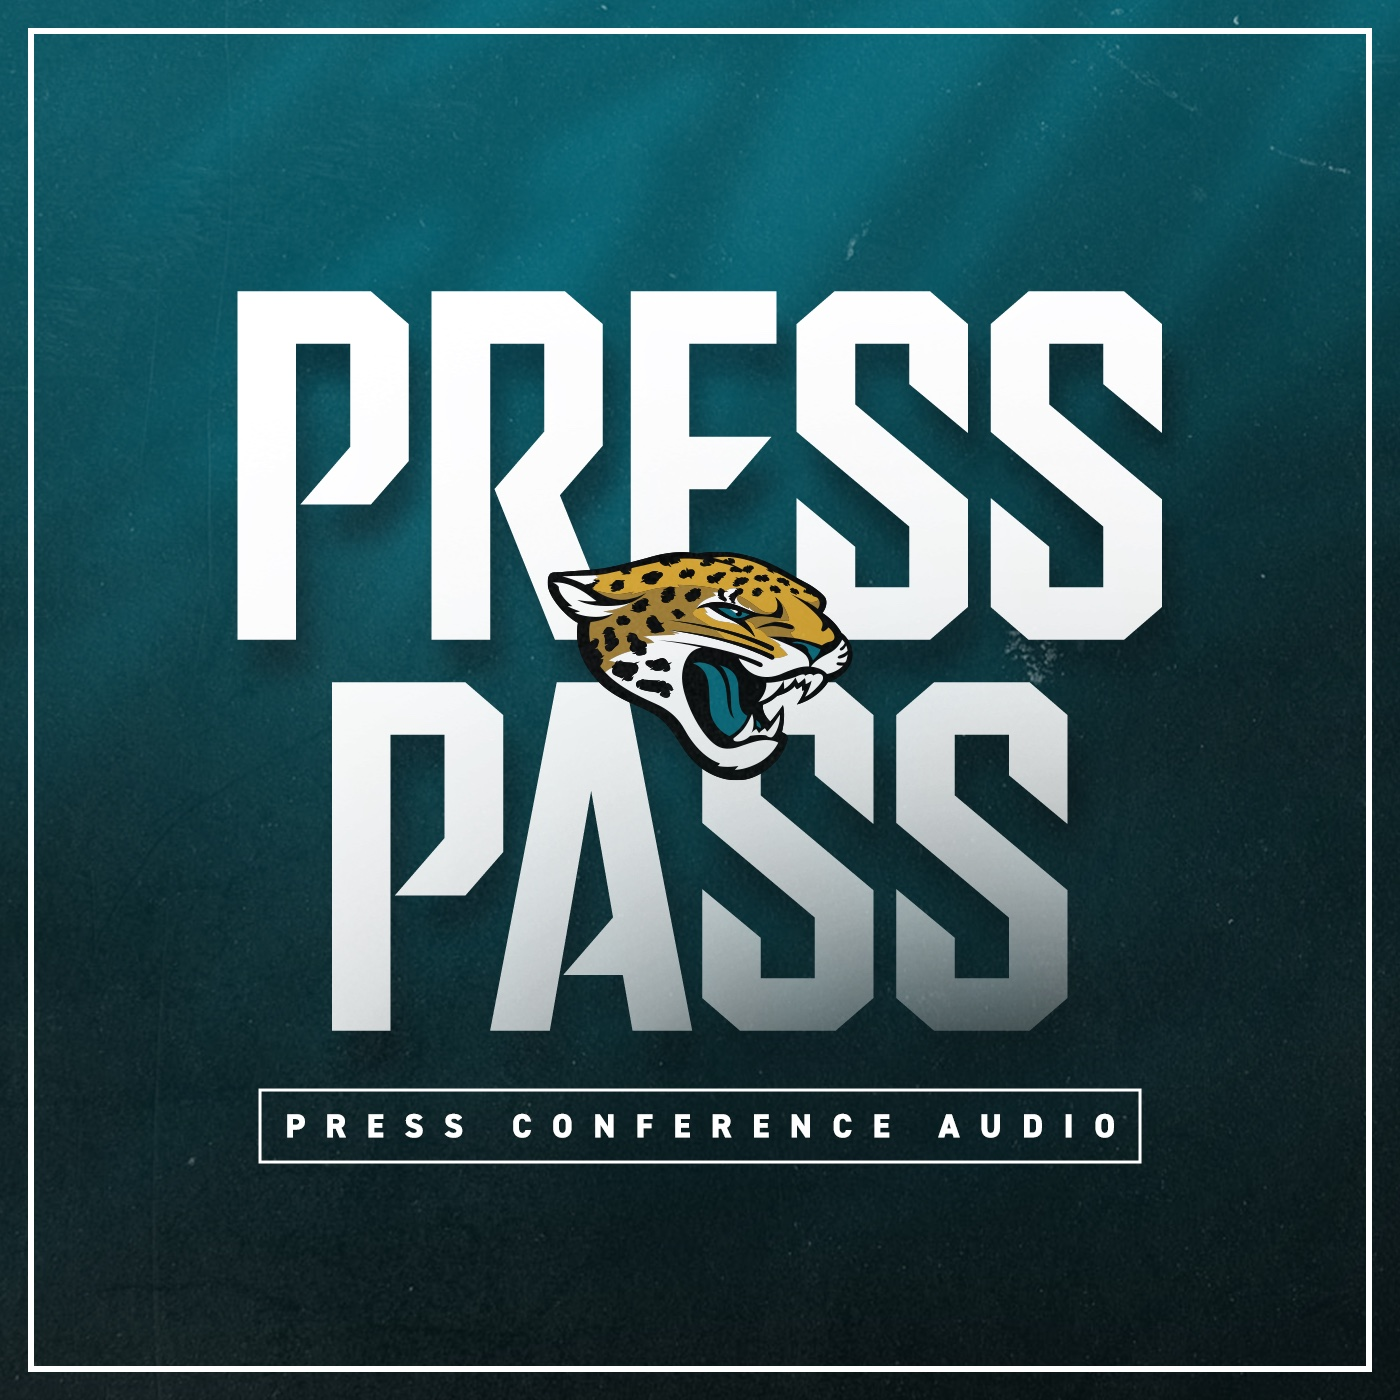 Press Pass | Mike Caldwell: "They’re throwing it around really well..."